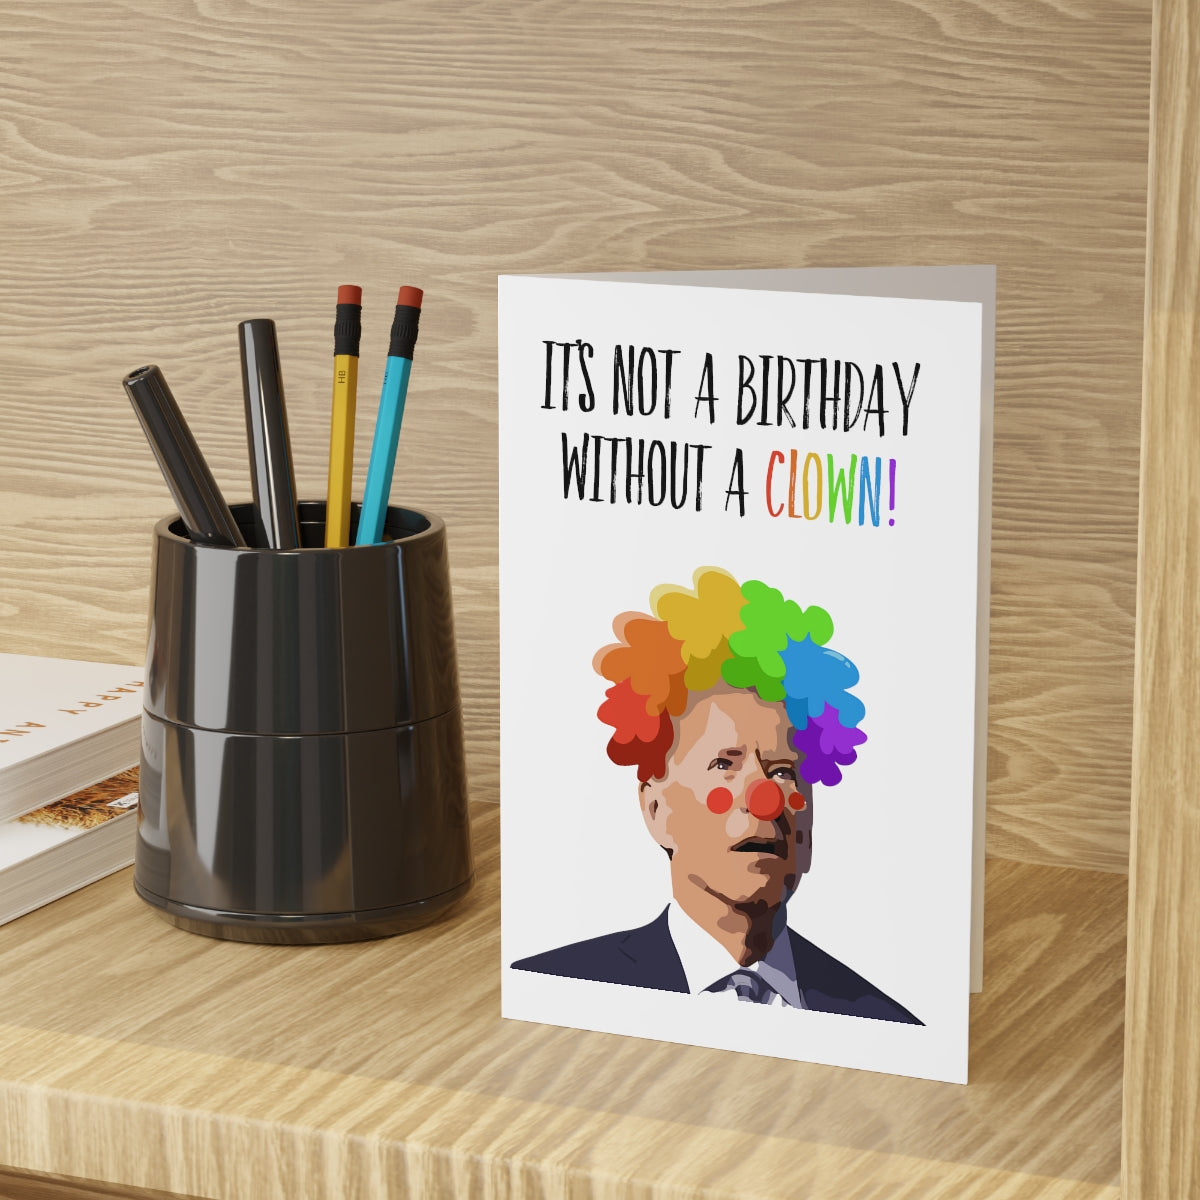 It's Not A Birthday Without A Clown - Birthday Card